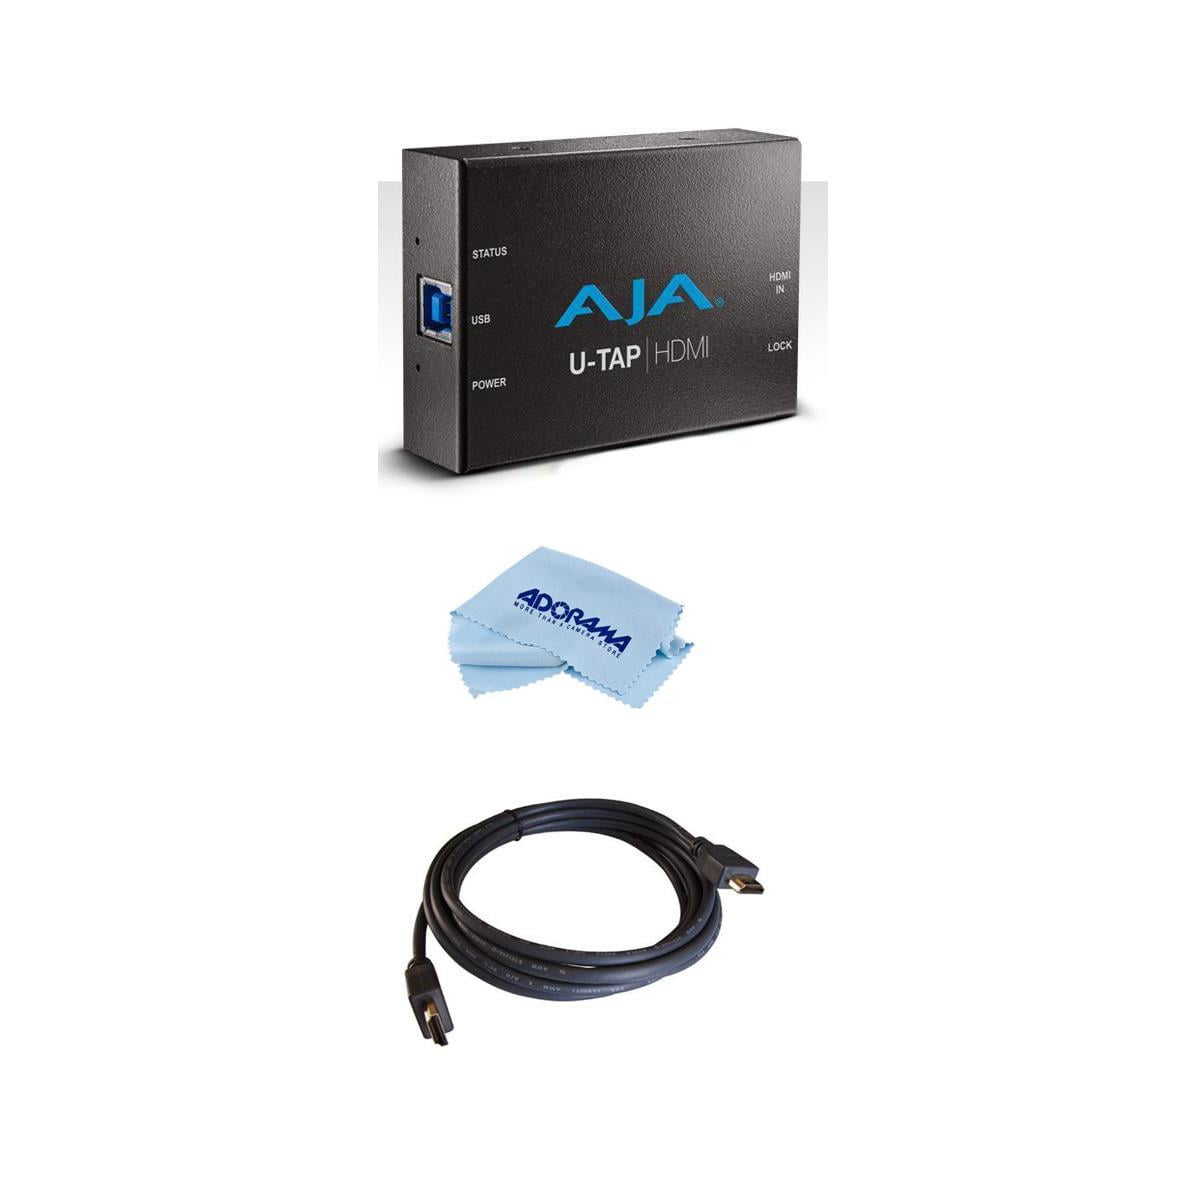 AJA U-TAP HDMI Simple USB 3.0 Powered HDMI Capture - With HDMI (M) to HDMI  (M) Cable, 6', Microfiber Cloth